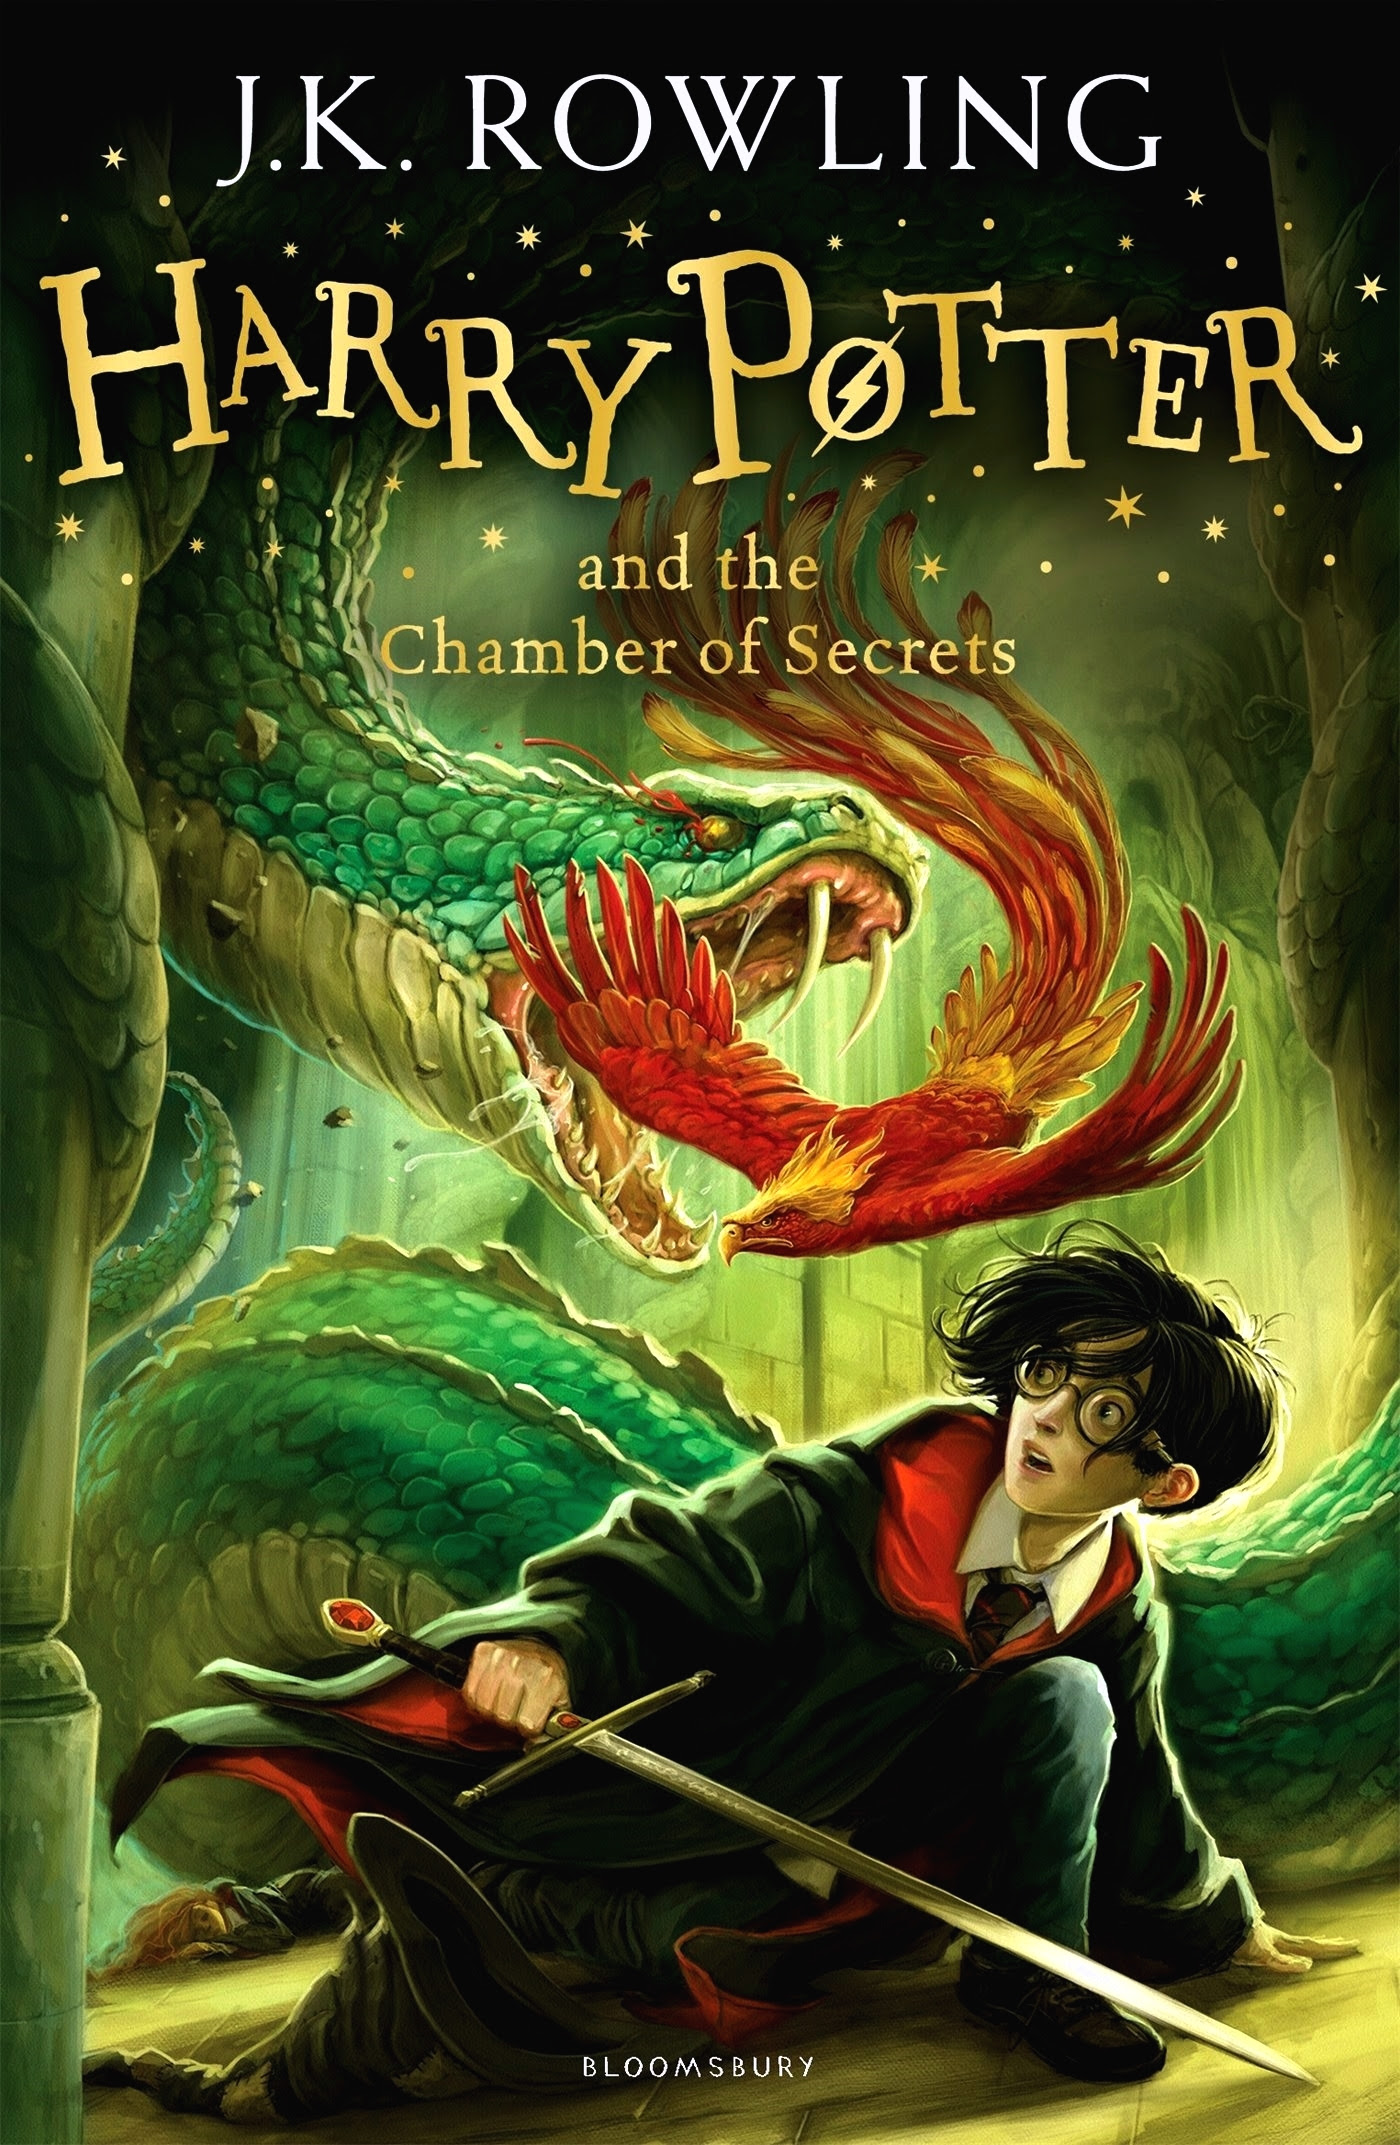 Harry Potter and the Chamber of Secrets (Harry Potter, #2) in Kindle/PDF/EPUB